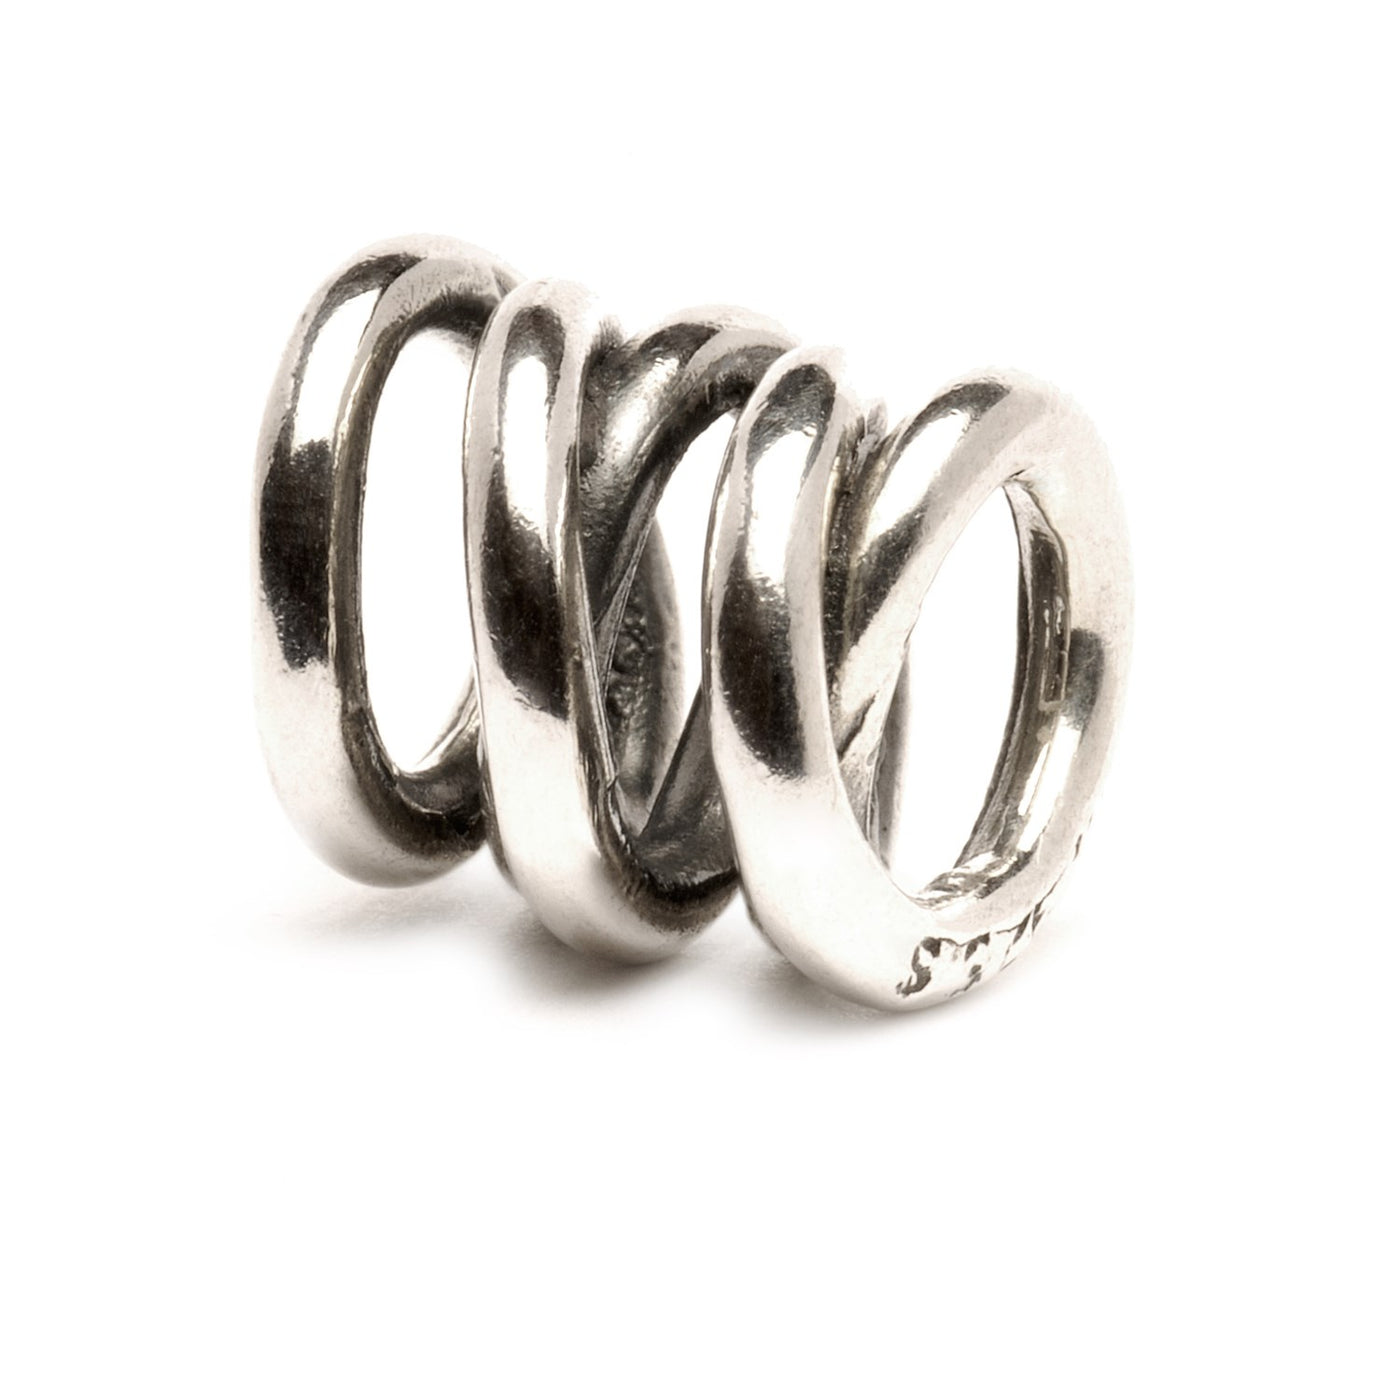 The Siblings Bead in sterling silver, features a entwined design of circles that go around your jewelry, symbolizing the bond between siblings.